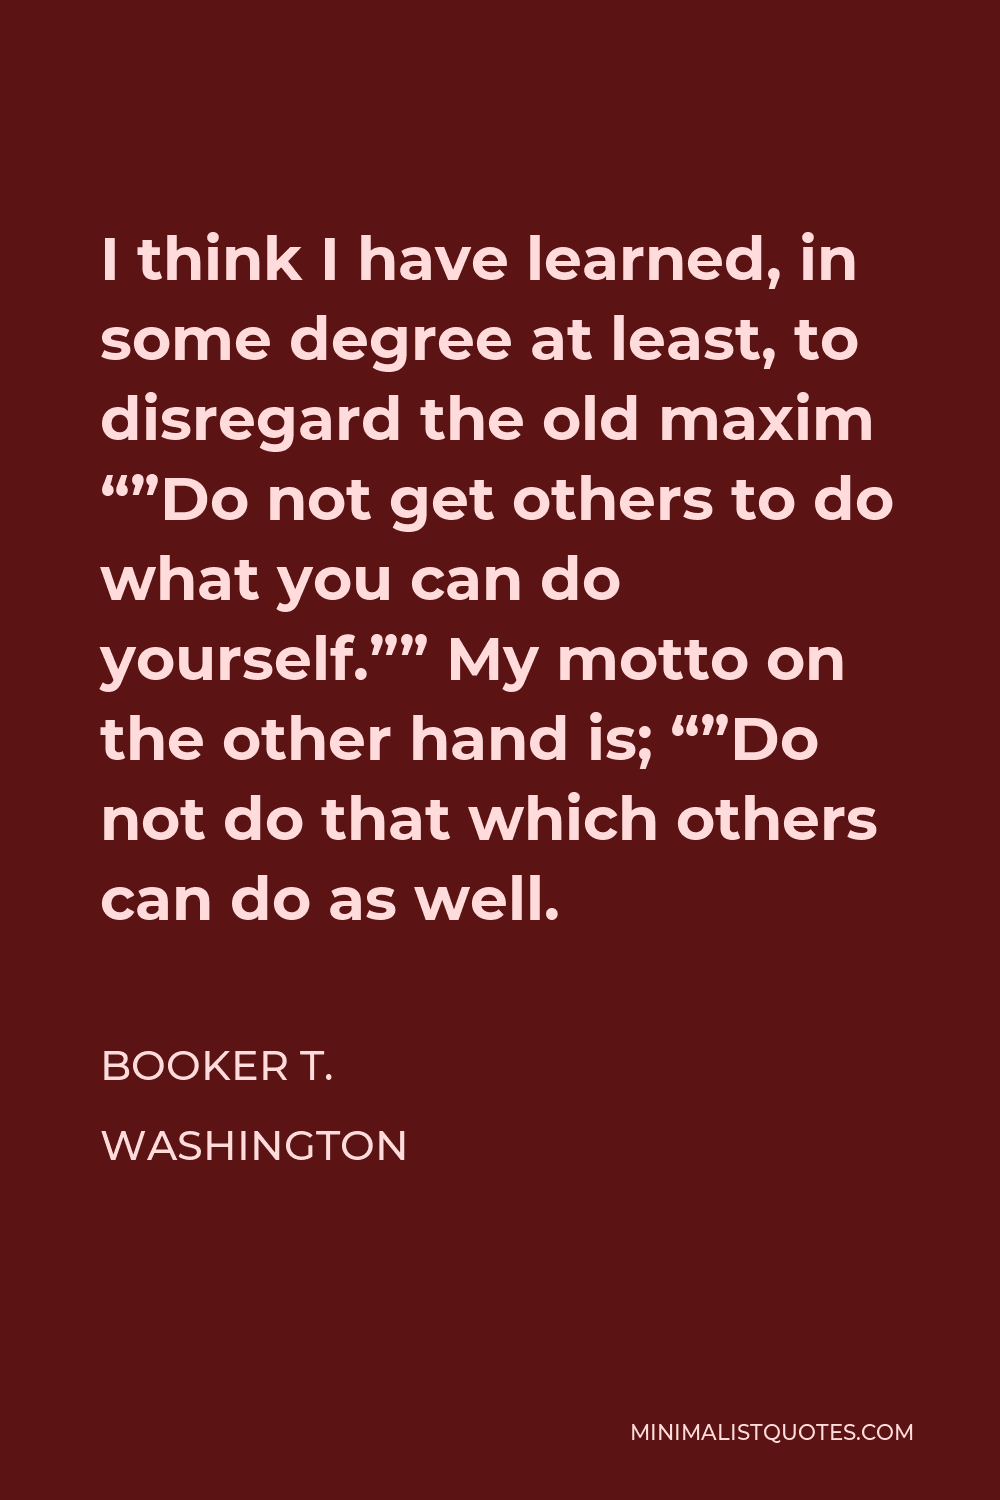 Booker T. Washington Quote - I think I have learned, in some degree at least, to disregard the old maxim “”Do not get others to do what you can do yourself.”” My motto on the other hand is; “”Do not do that which others can do as well.